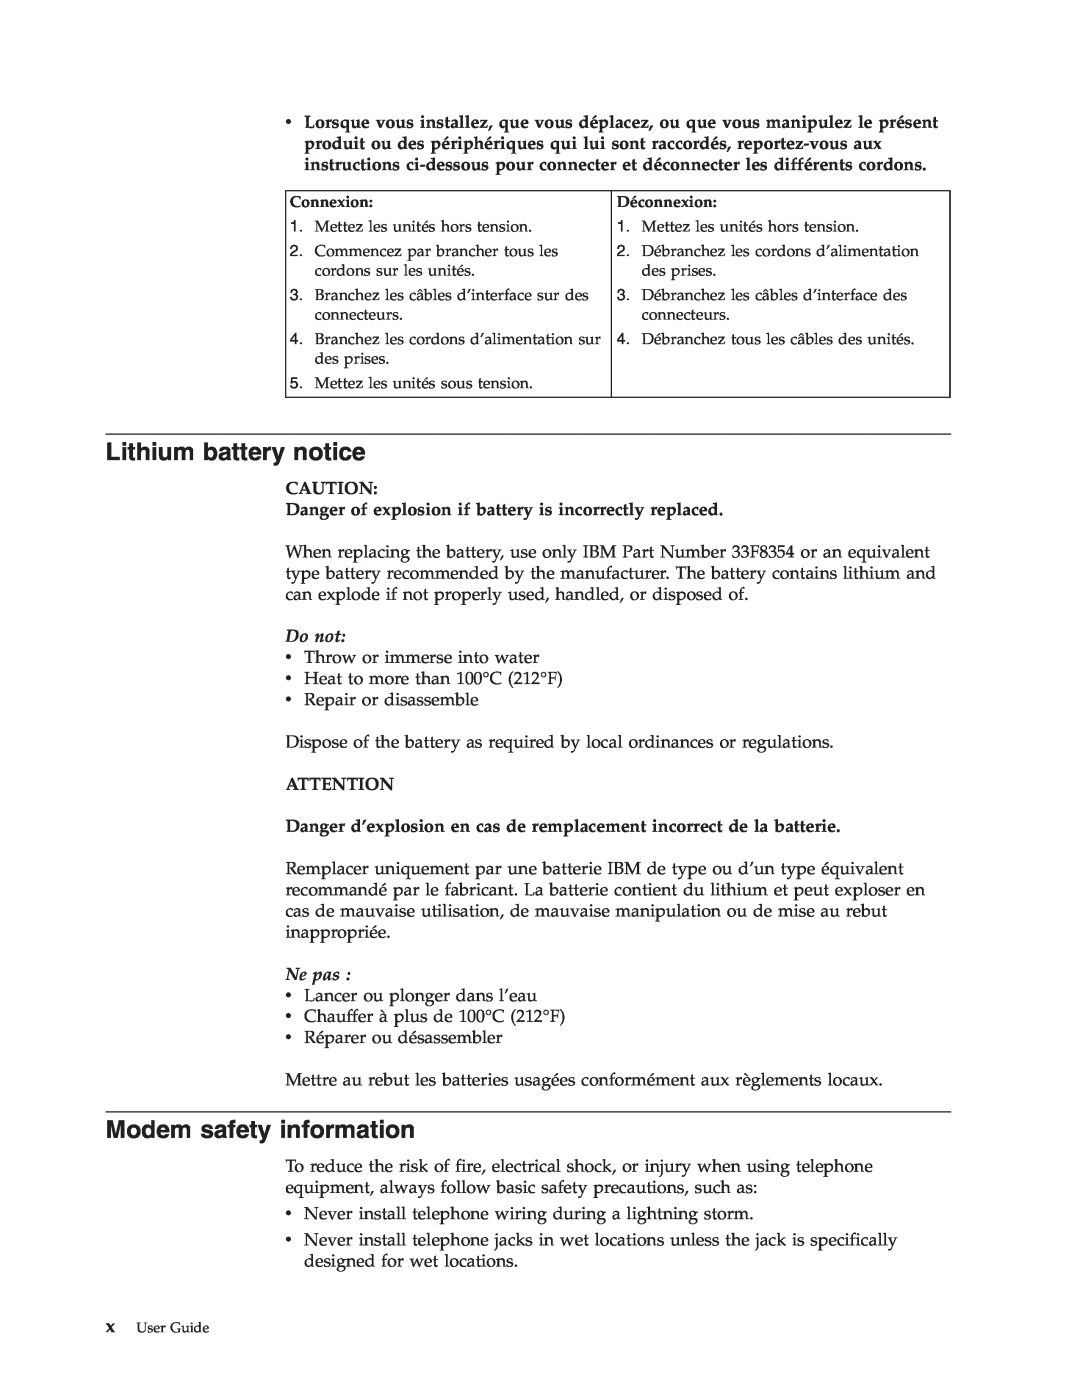 IBM 8188 Lithium battery notice, Modem safety information, Danger of explosion if battery is incorrectly replaced, Do not 